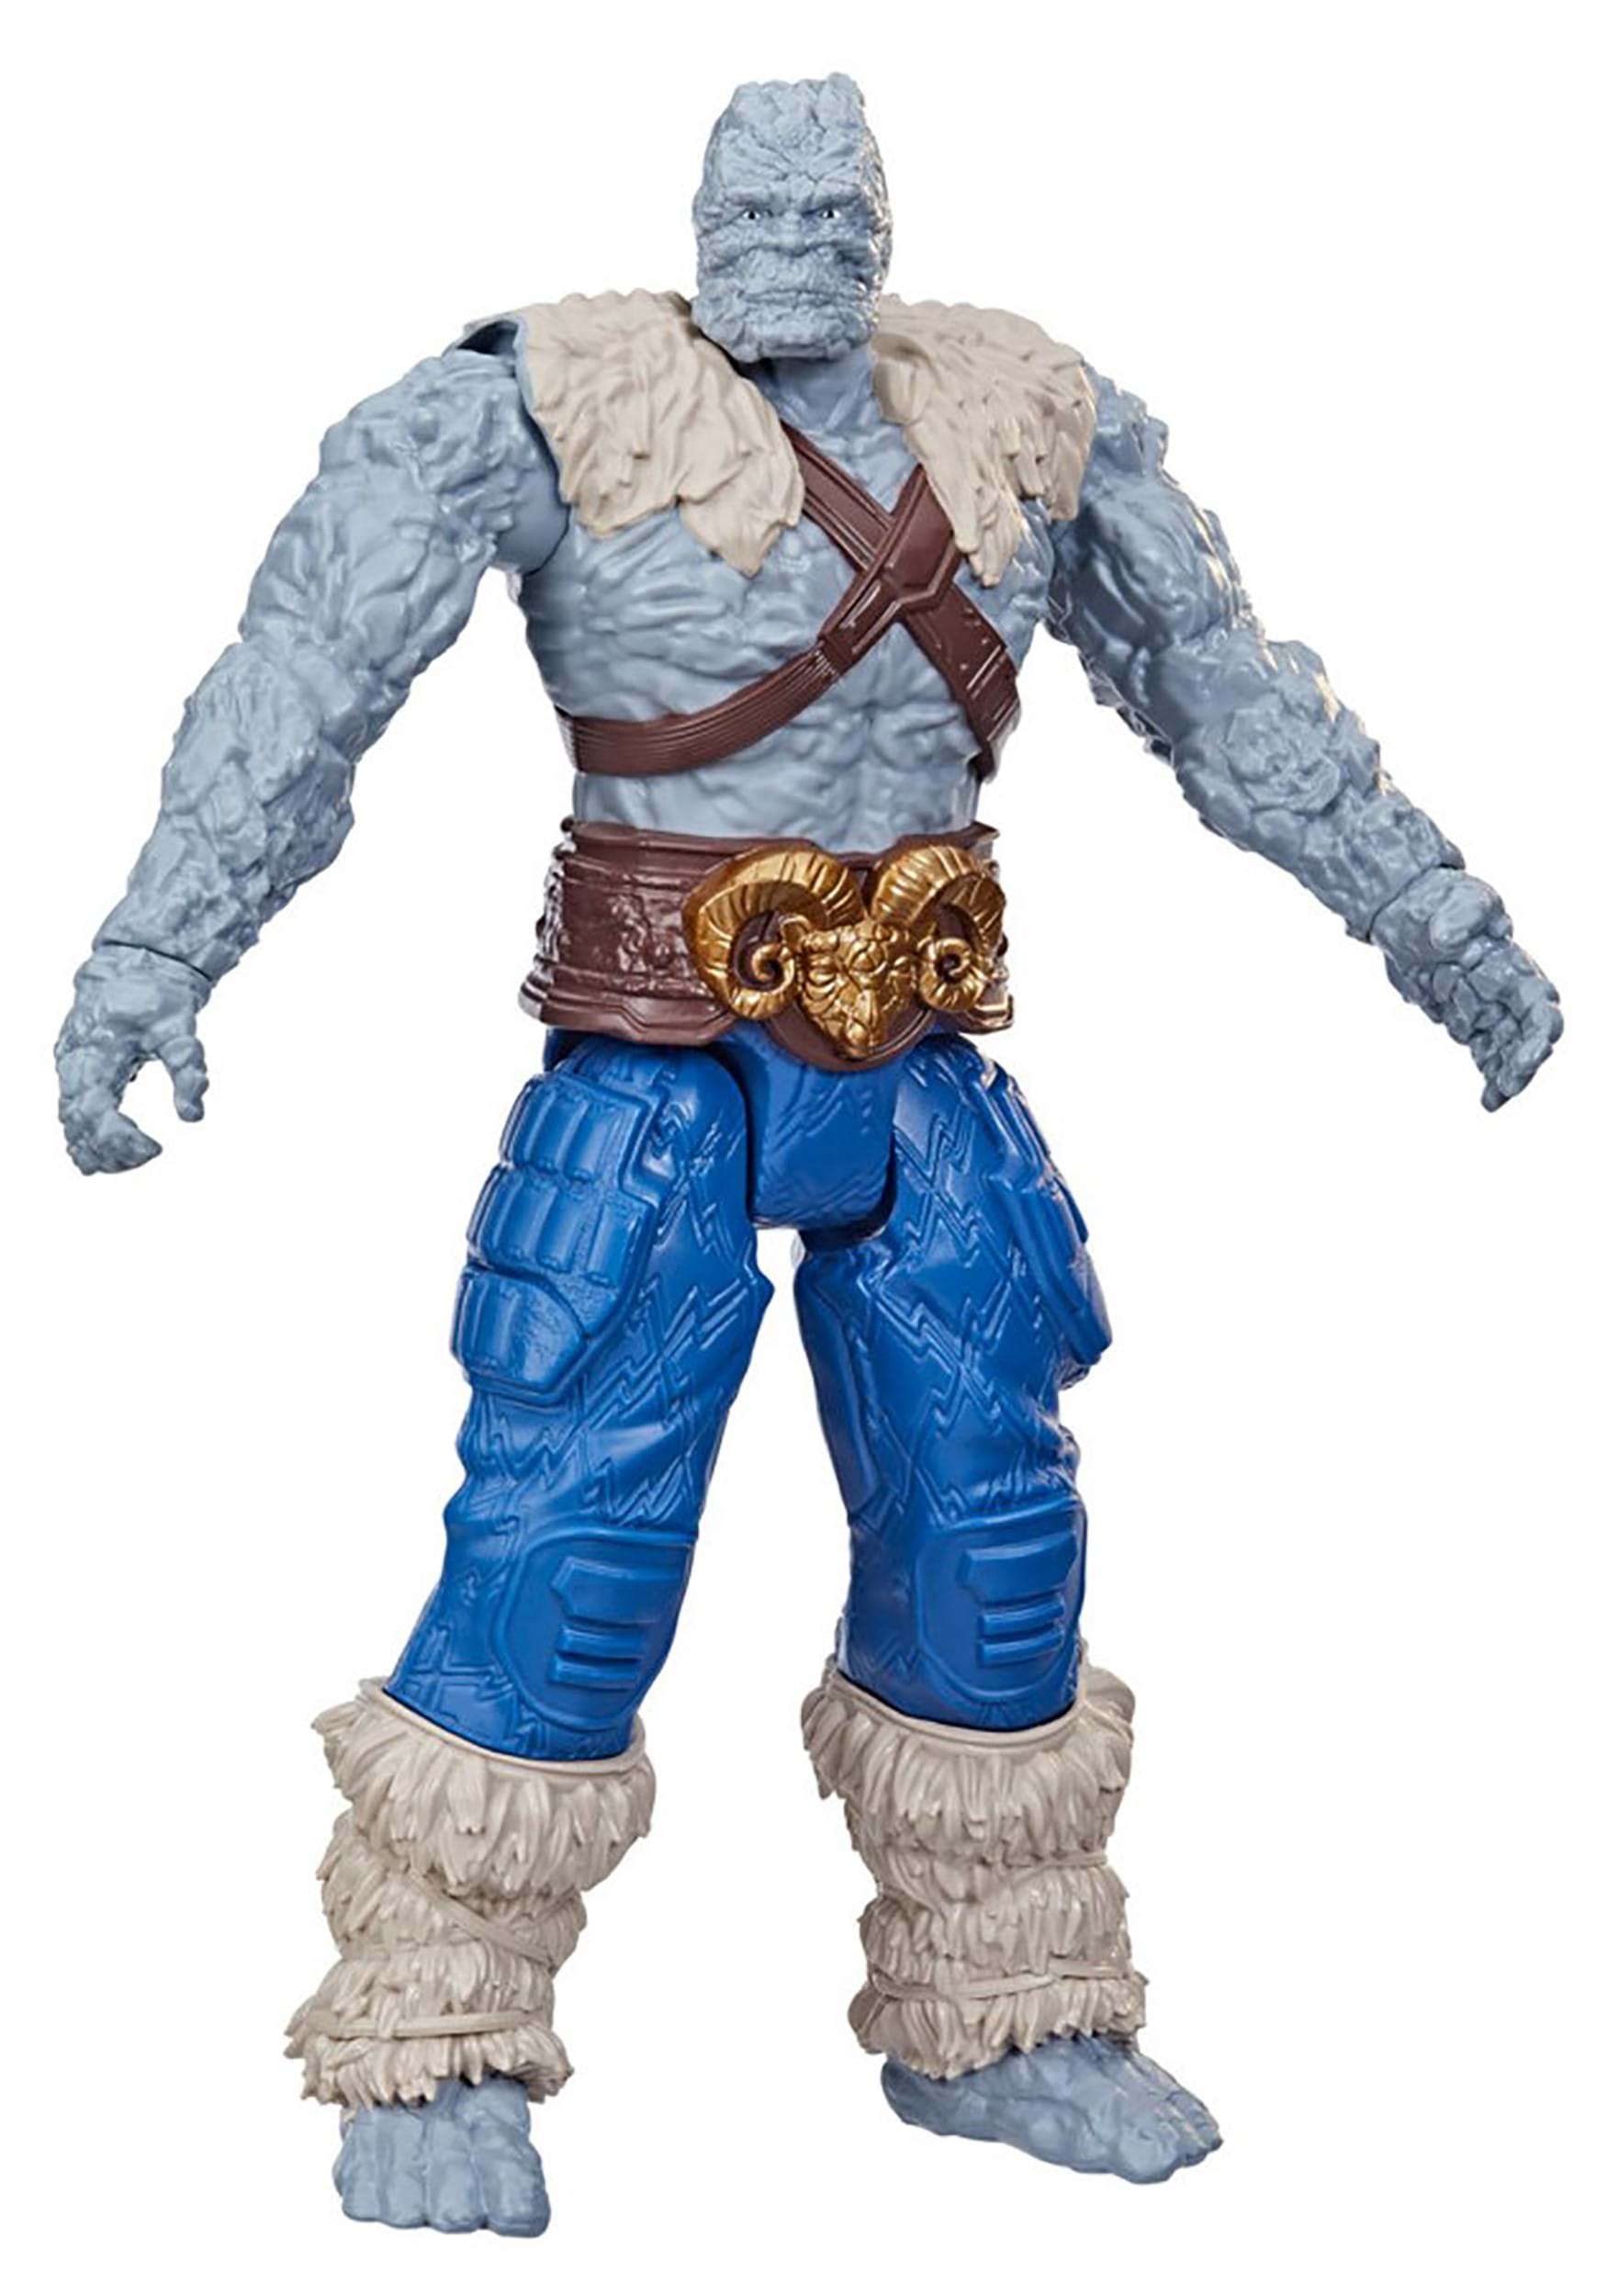 Thor: Love and Thunder Deluxe Korg 12-Inch Action Figure